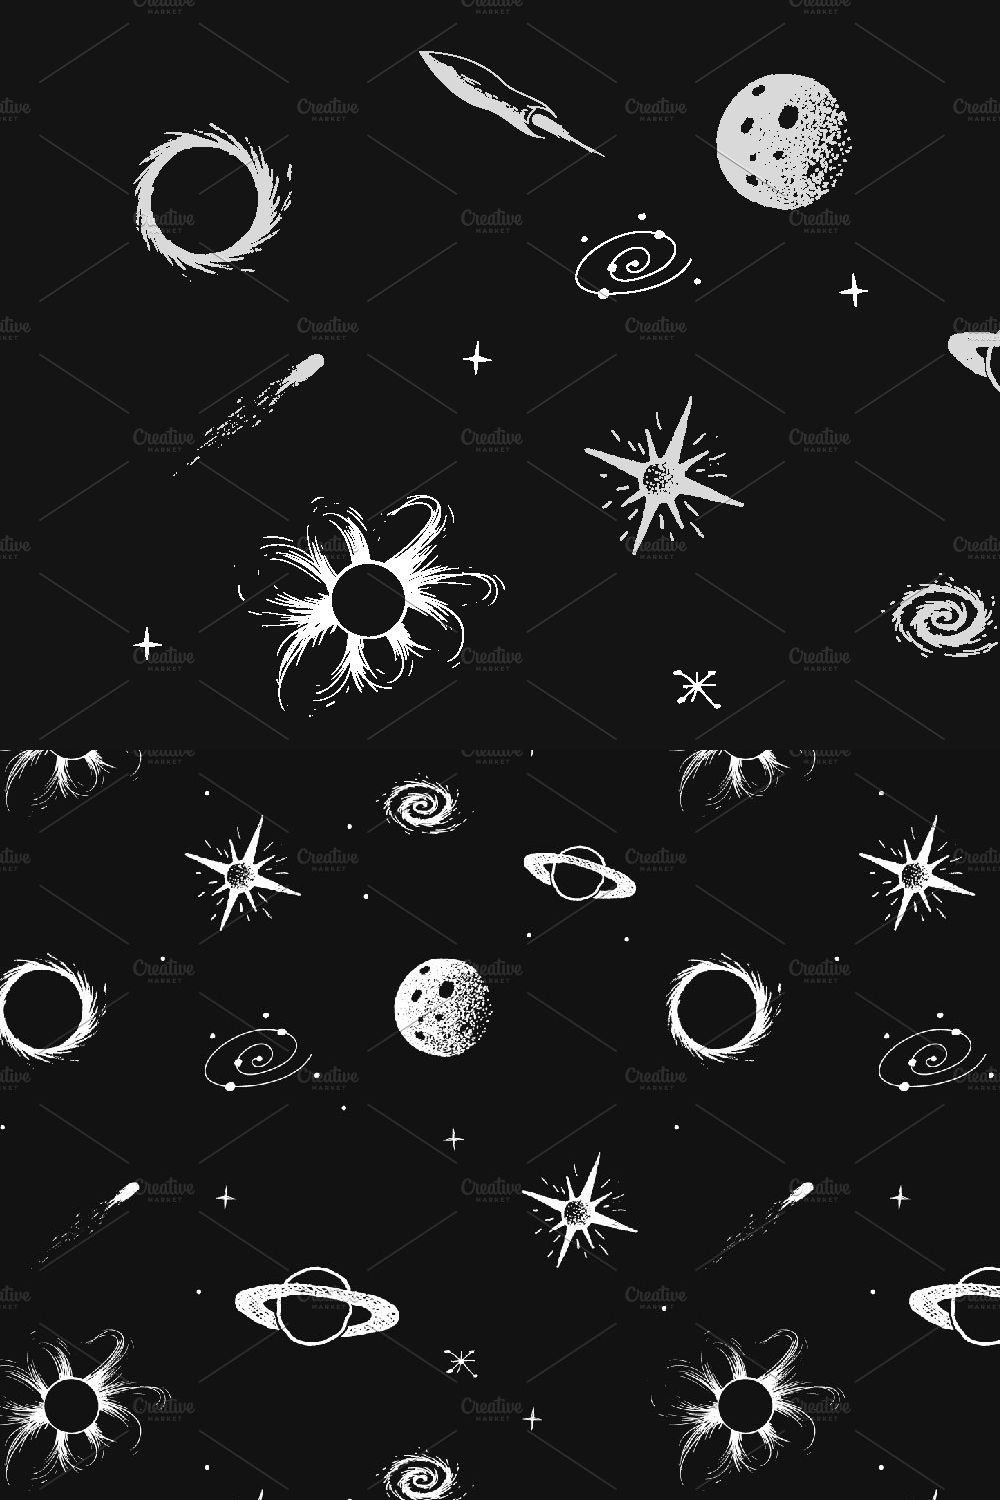 Collection of universe objects pinterest preview image.